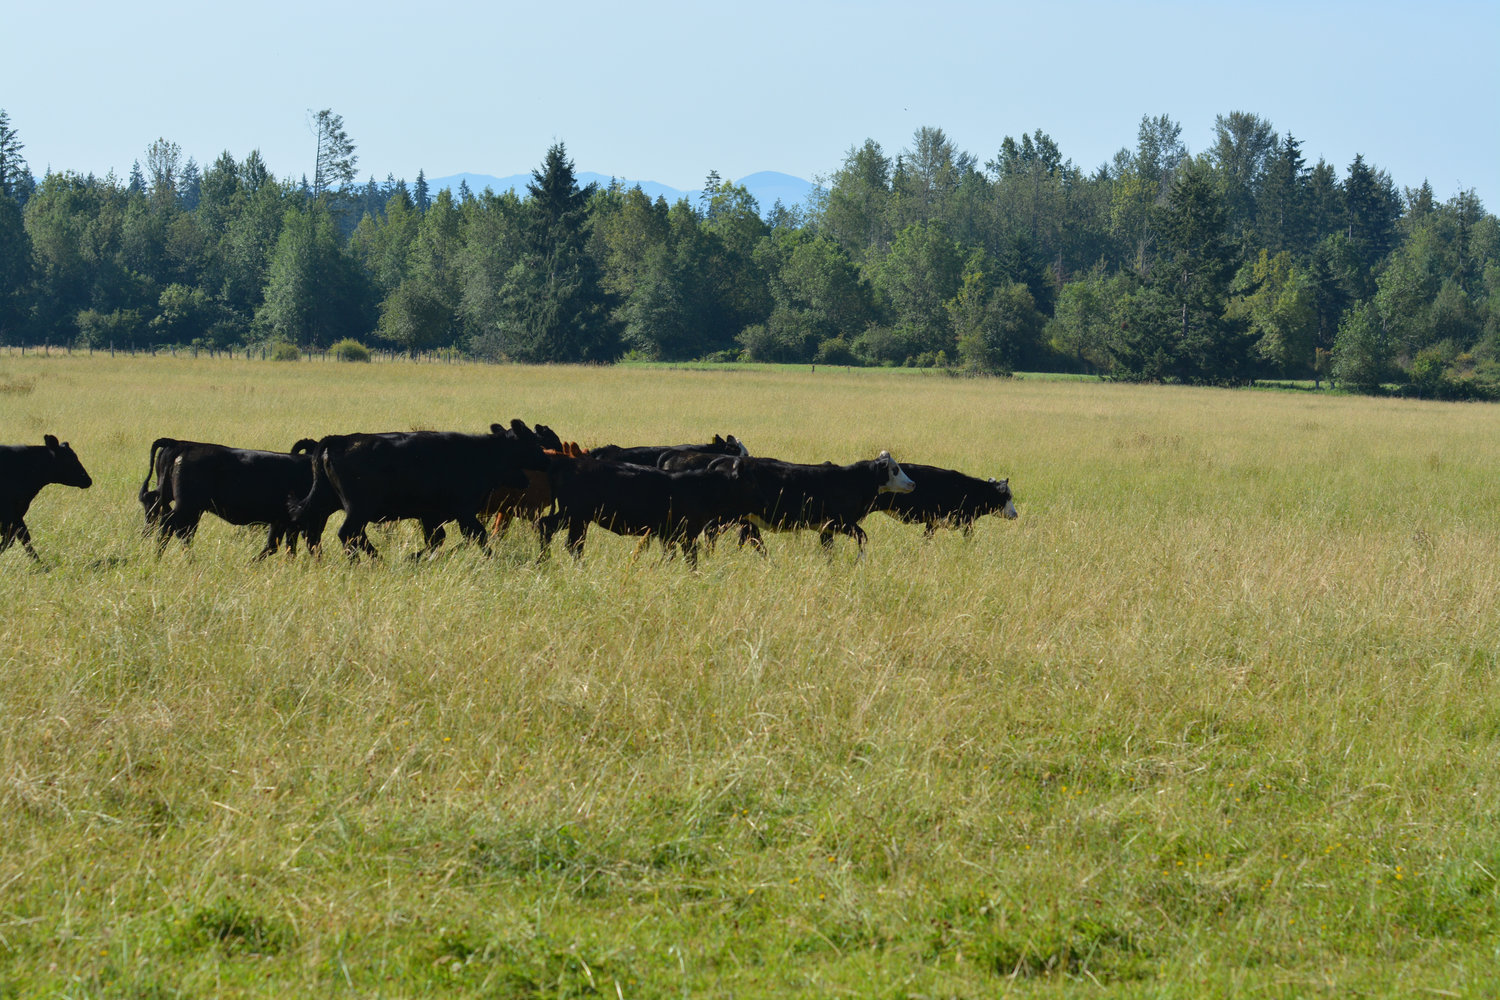 Lester’s herd continued their morning run in the fields on Monday, Aug. 8.